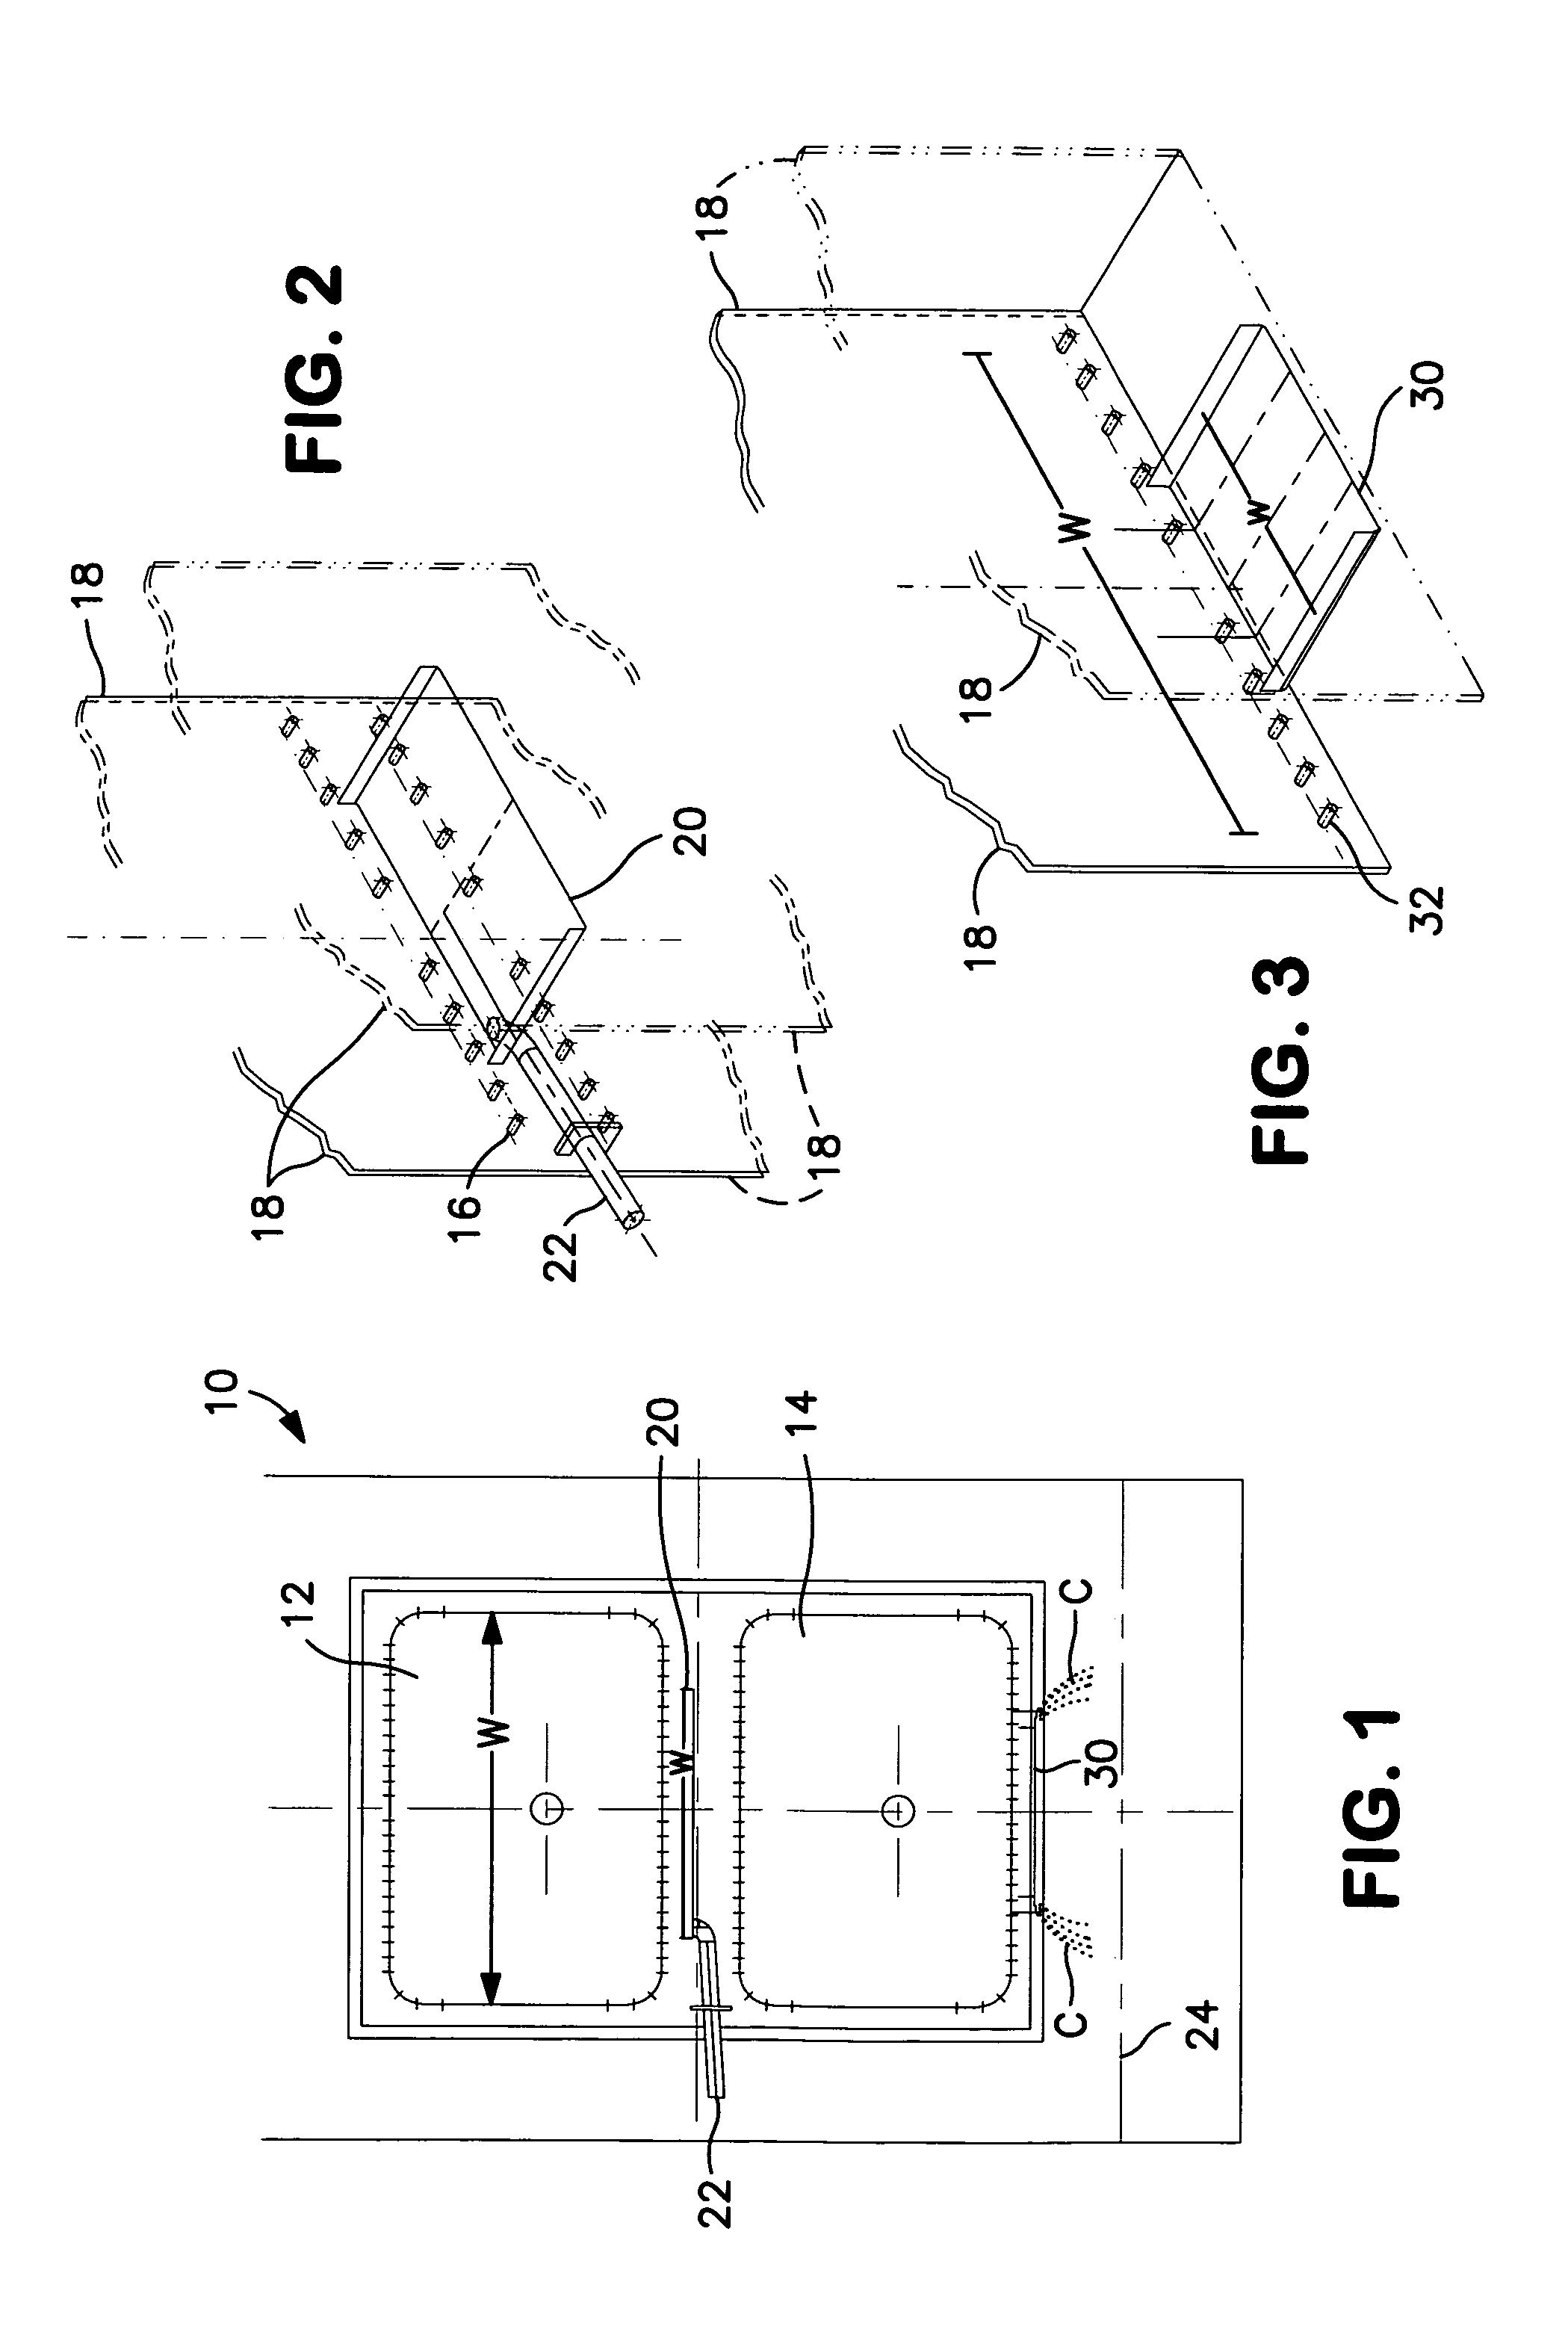 Method and apparatus to improve performance of power plant steam surface condensers